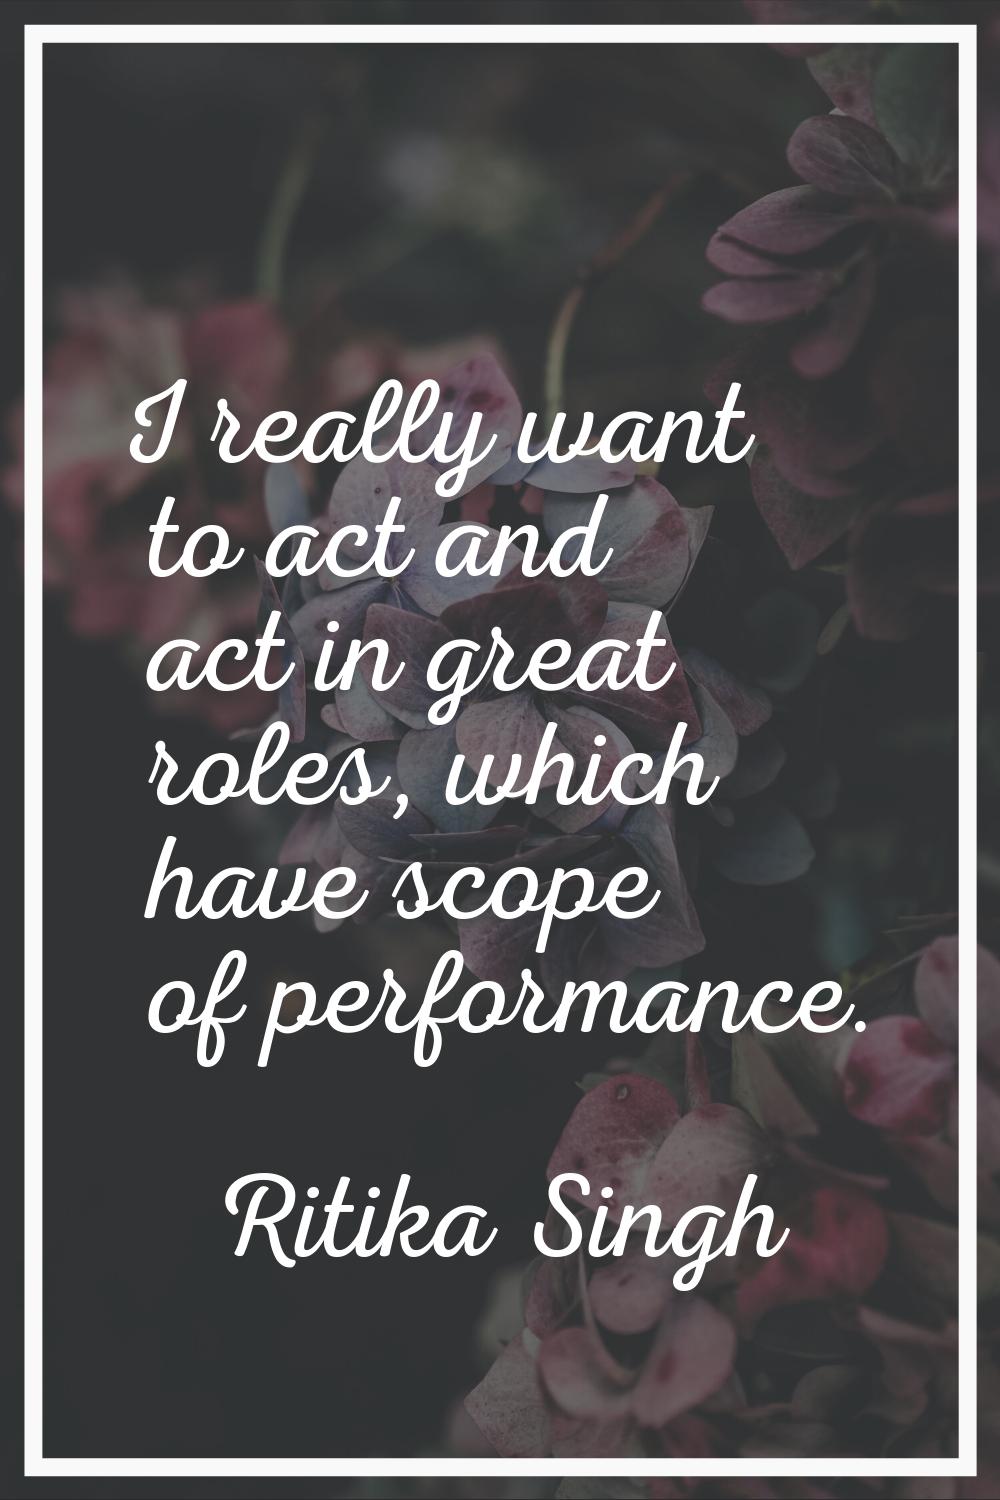 I really want to act and act in great roles, which have scope of performance.